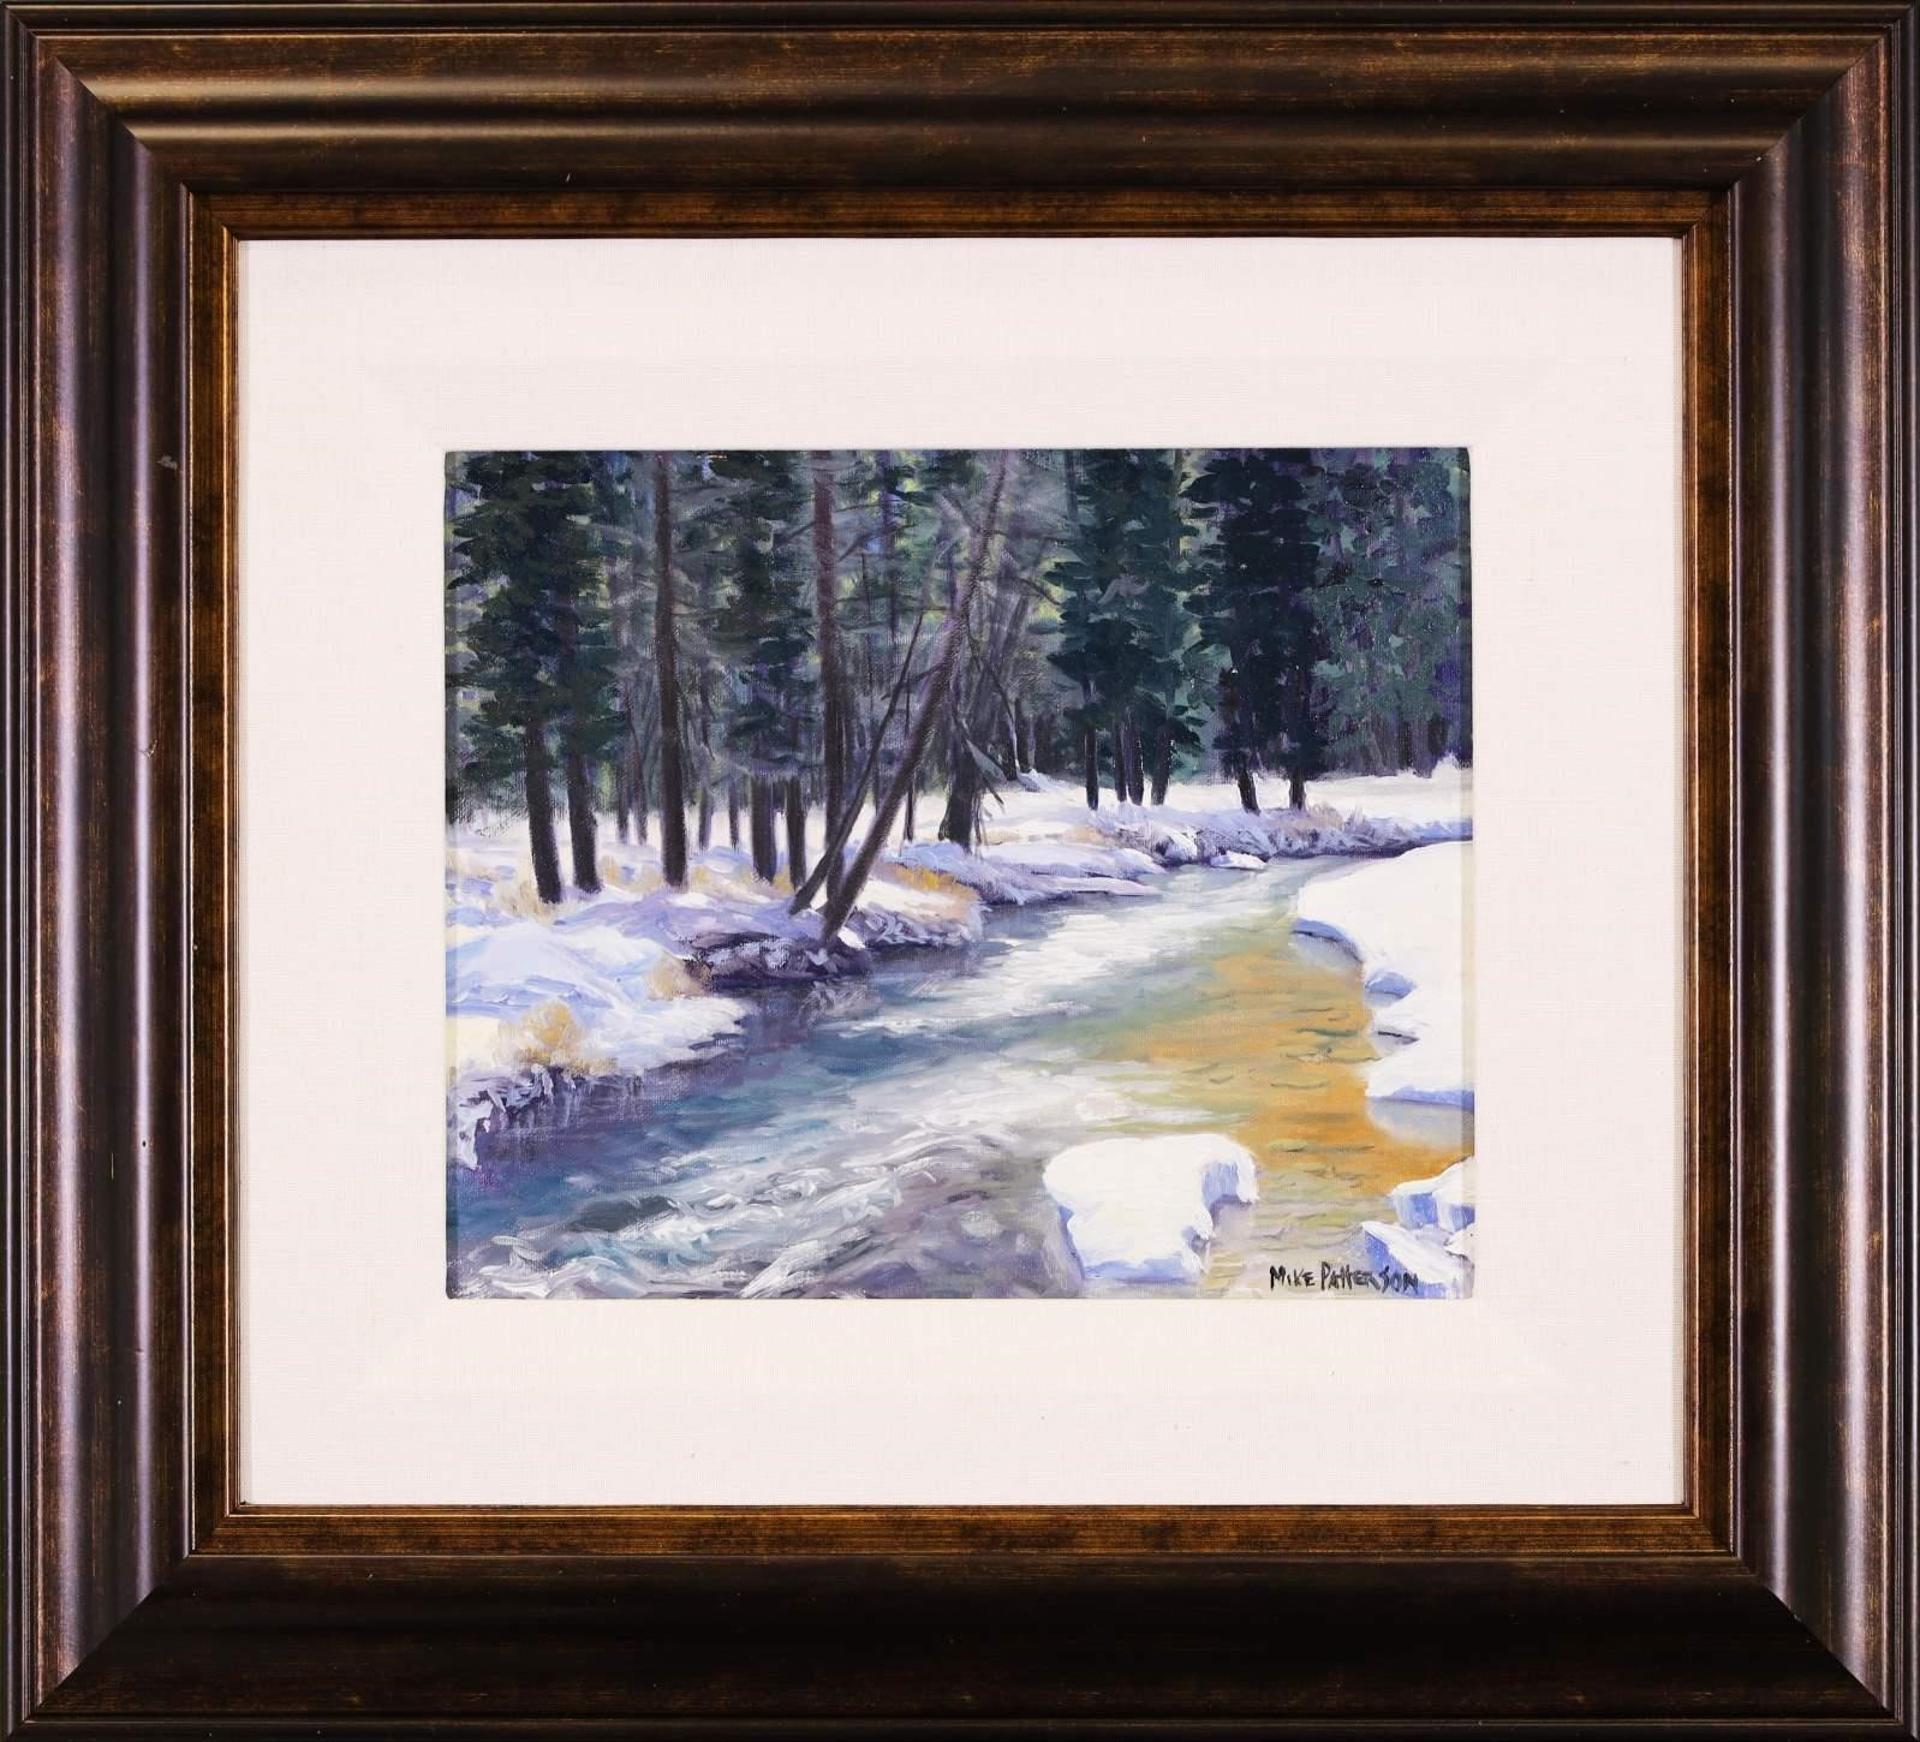 Mike Patterson (1943) - Mike Horse Creek Thaw